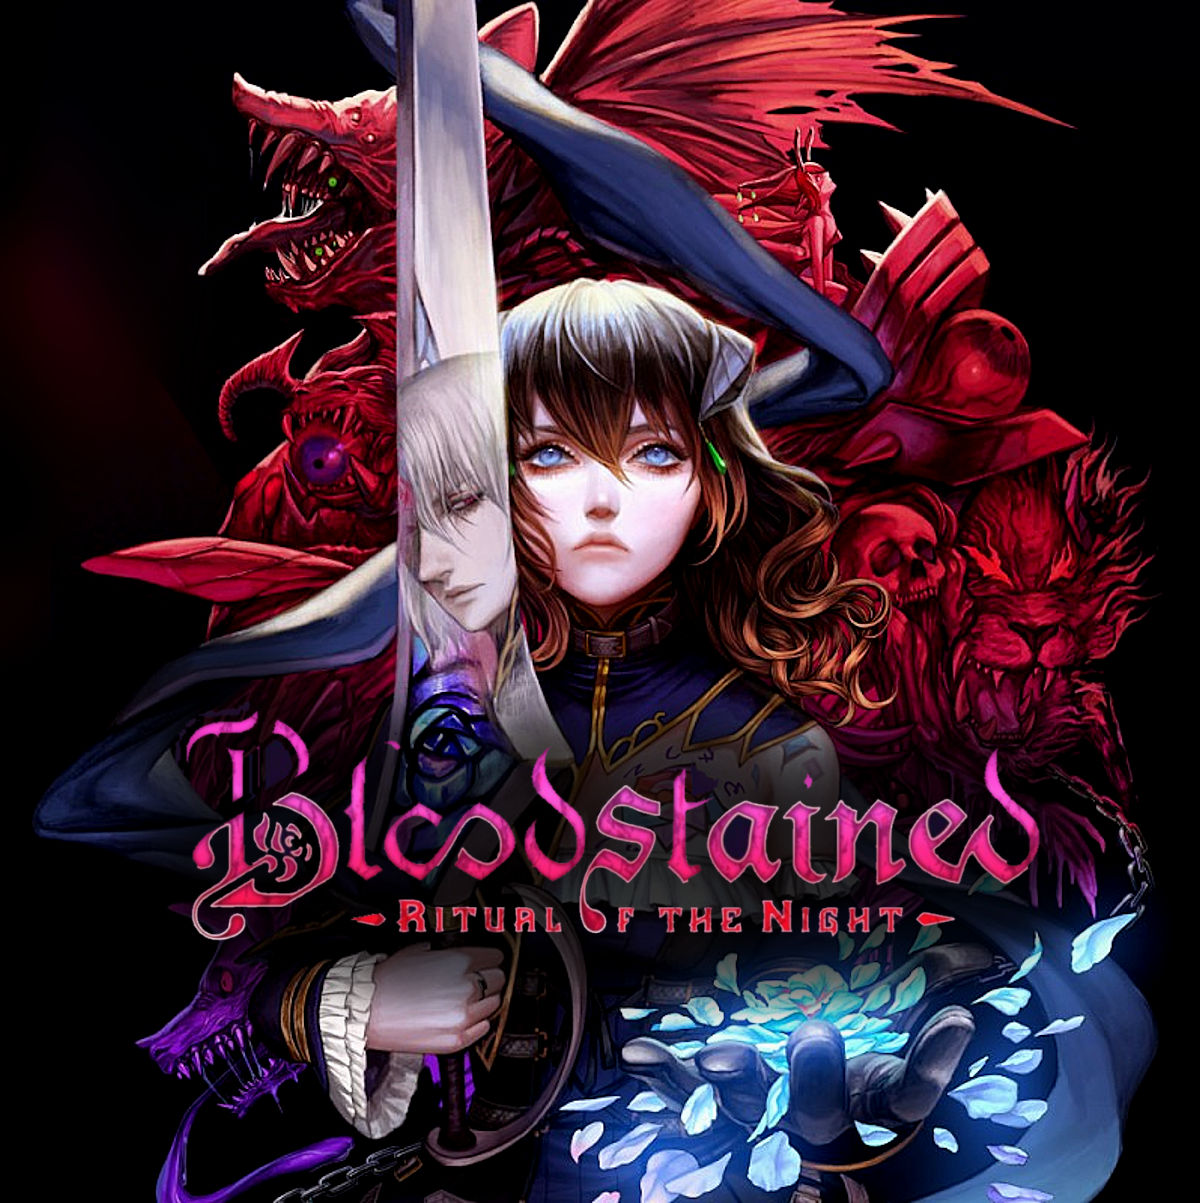 Aurora su Bloodstained: Ritual of the Night